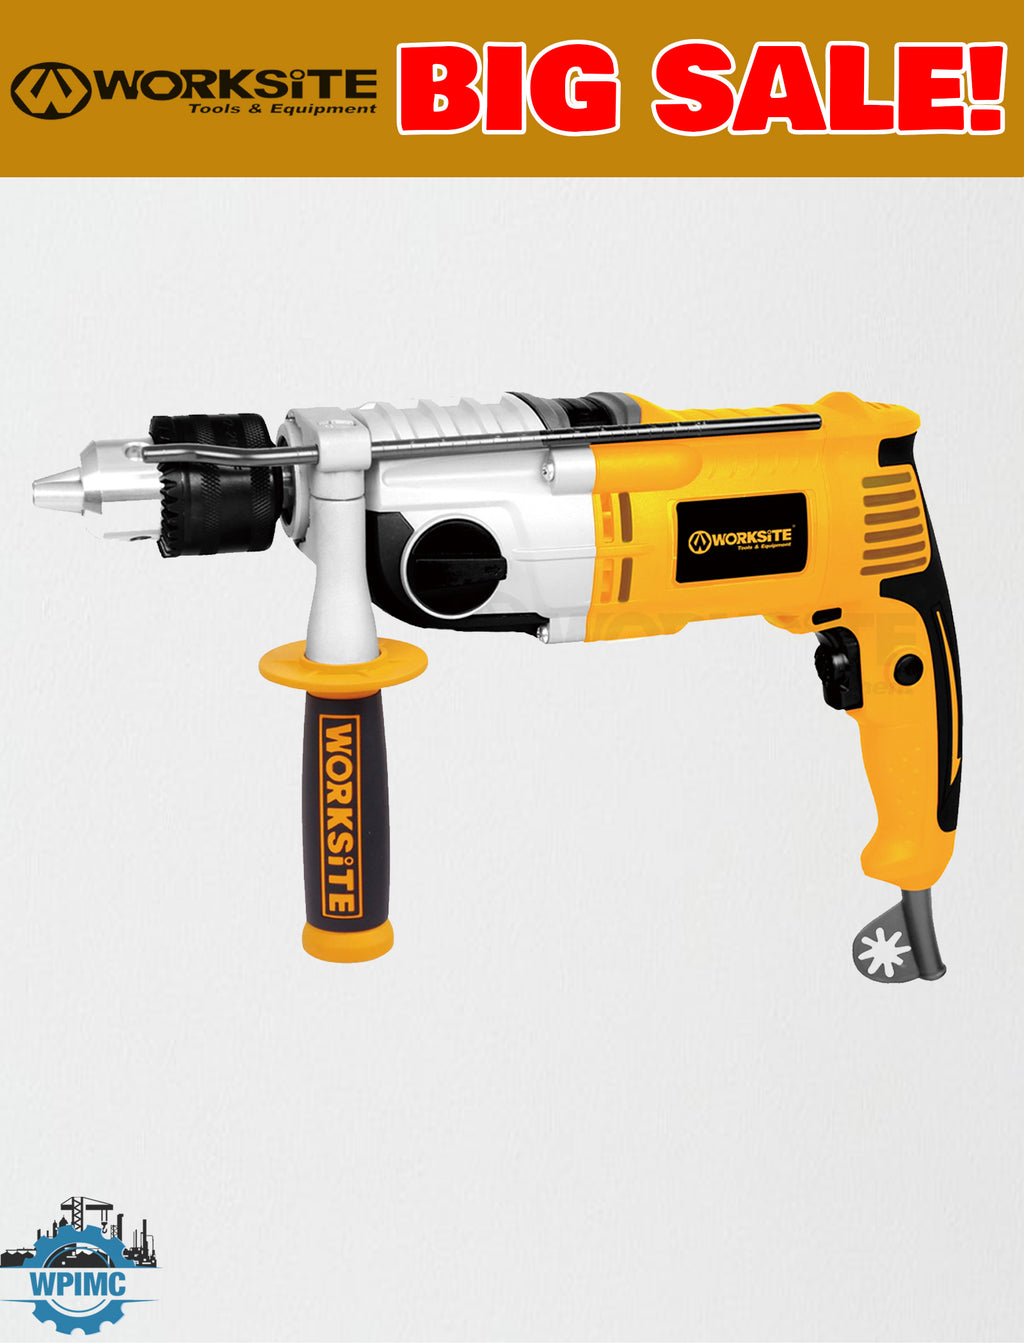 WORKSITE ELECTRIC IMPACT DRILL EID430